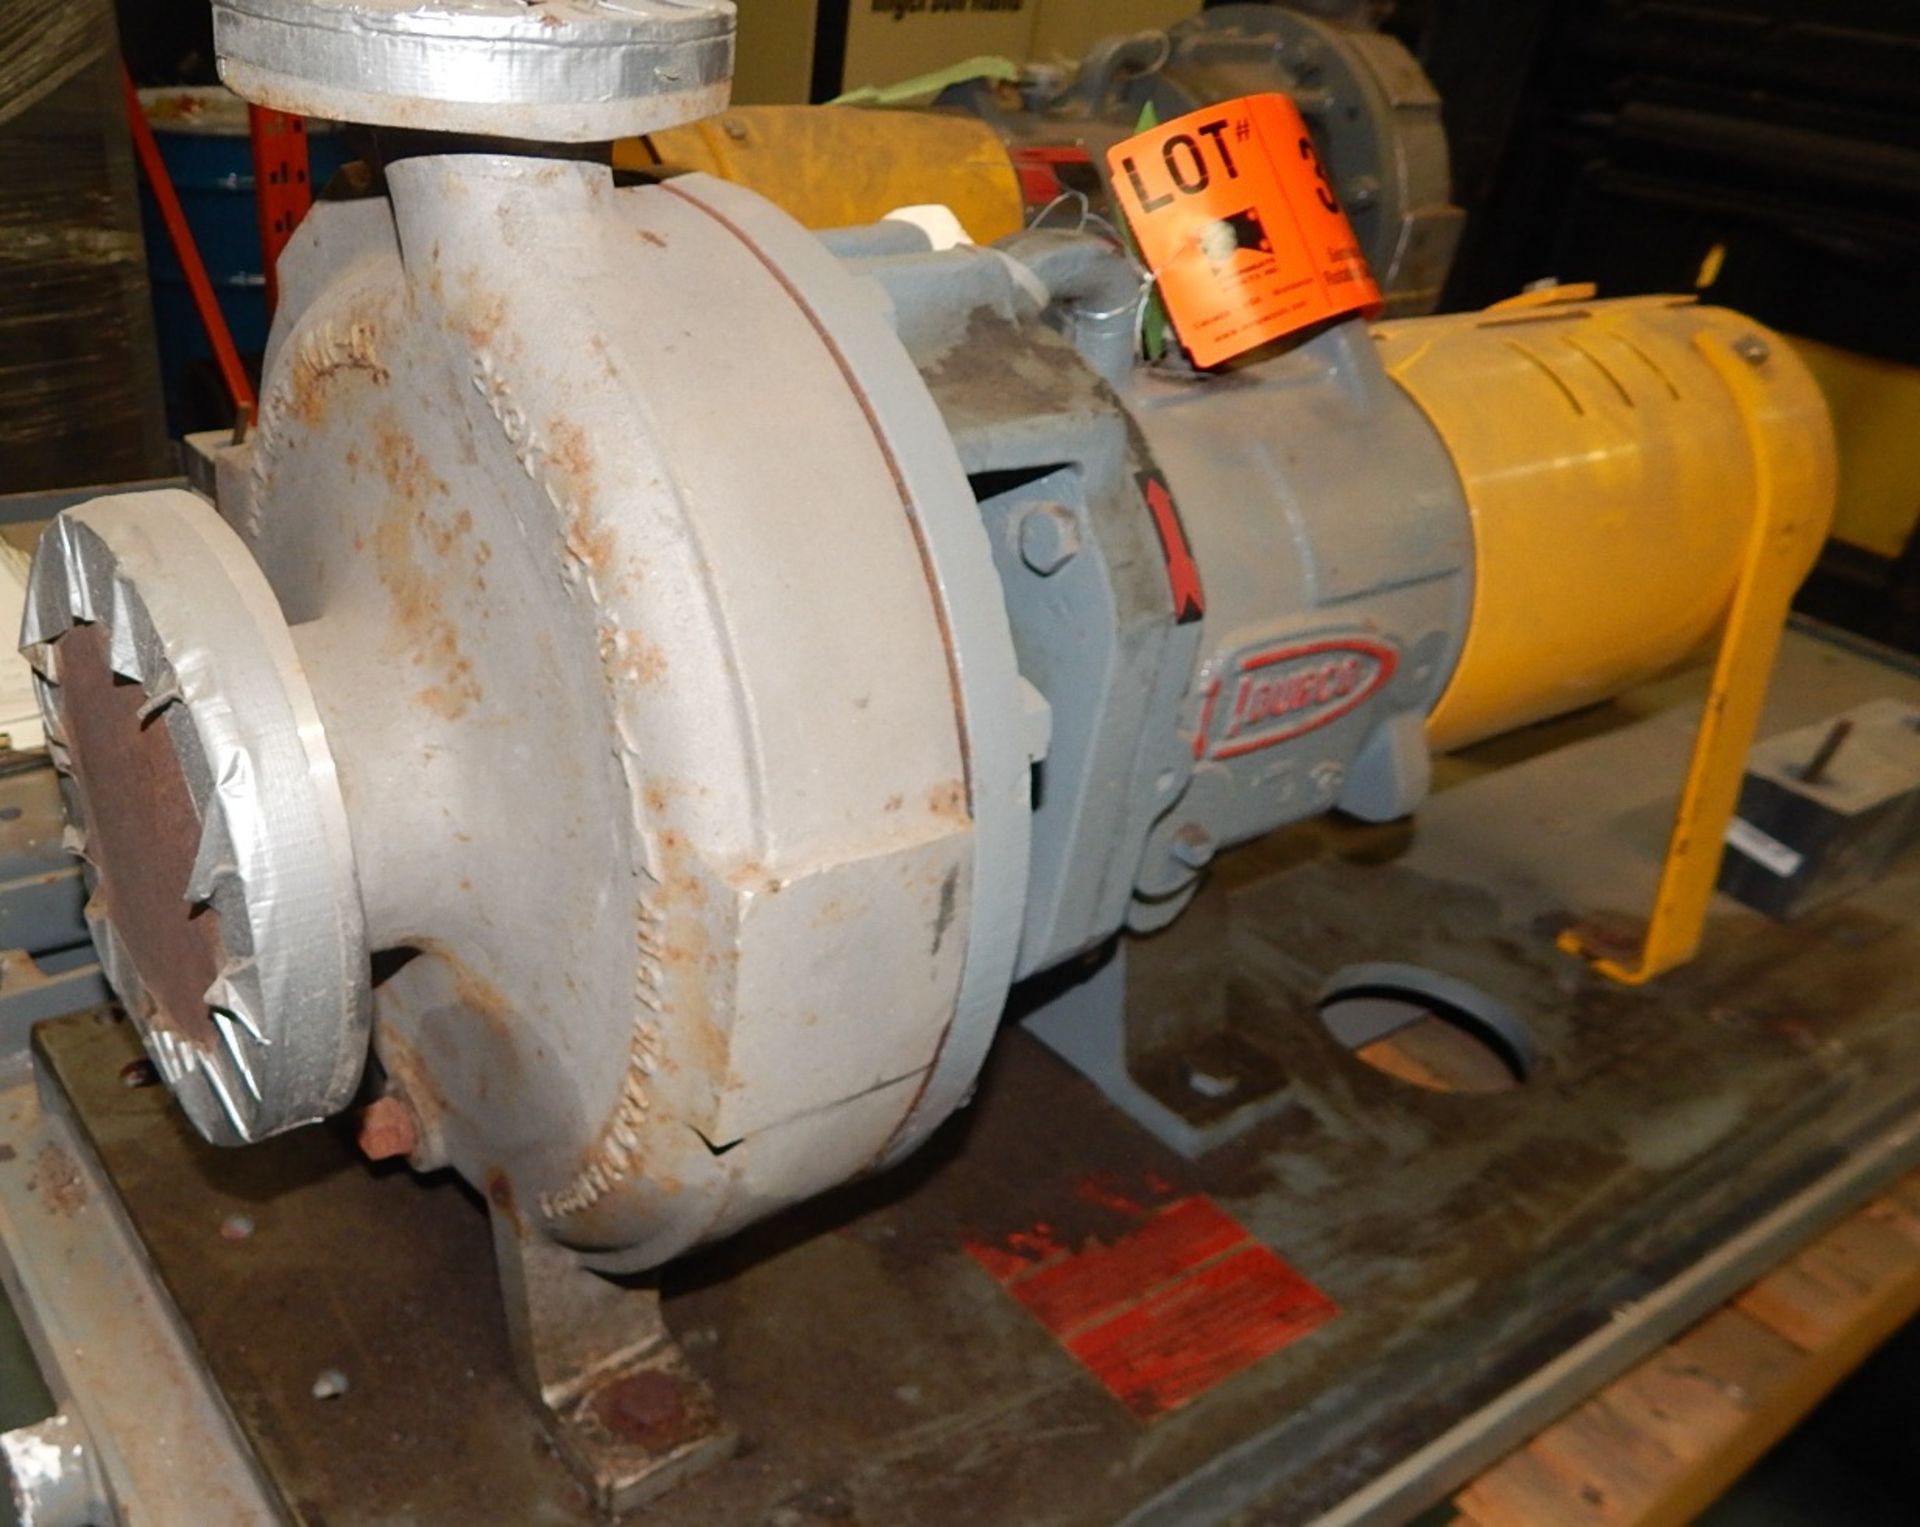 FLOWSERVE 2K3X1.5-10ARV CENTRIFUGAL PUMP WITH 1700 RPM, 70 USGMP, S/N: B020232-17 (CI) [RIGGING - Image 2 of 4